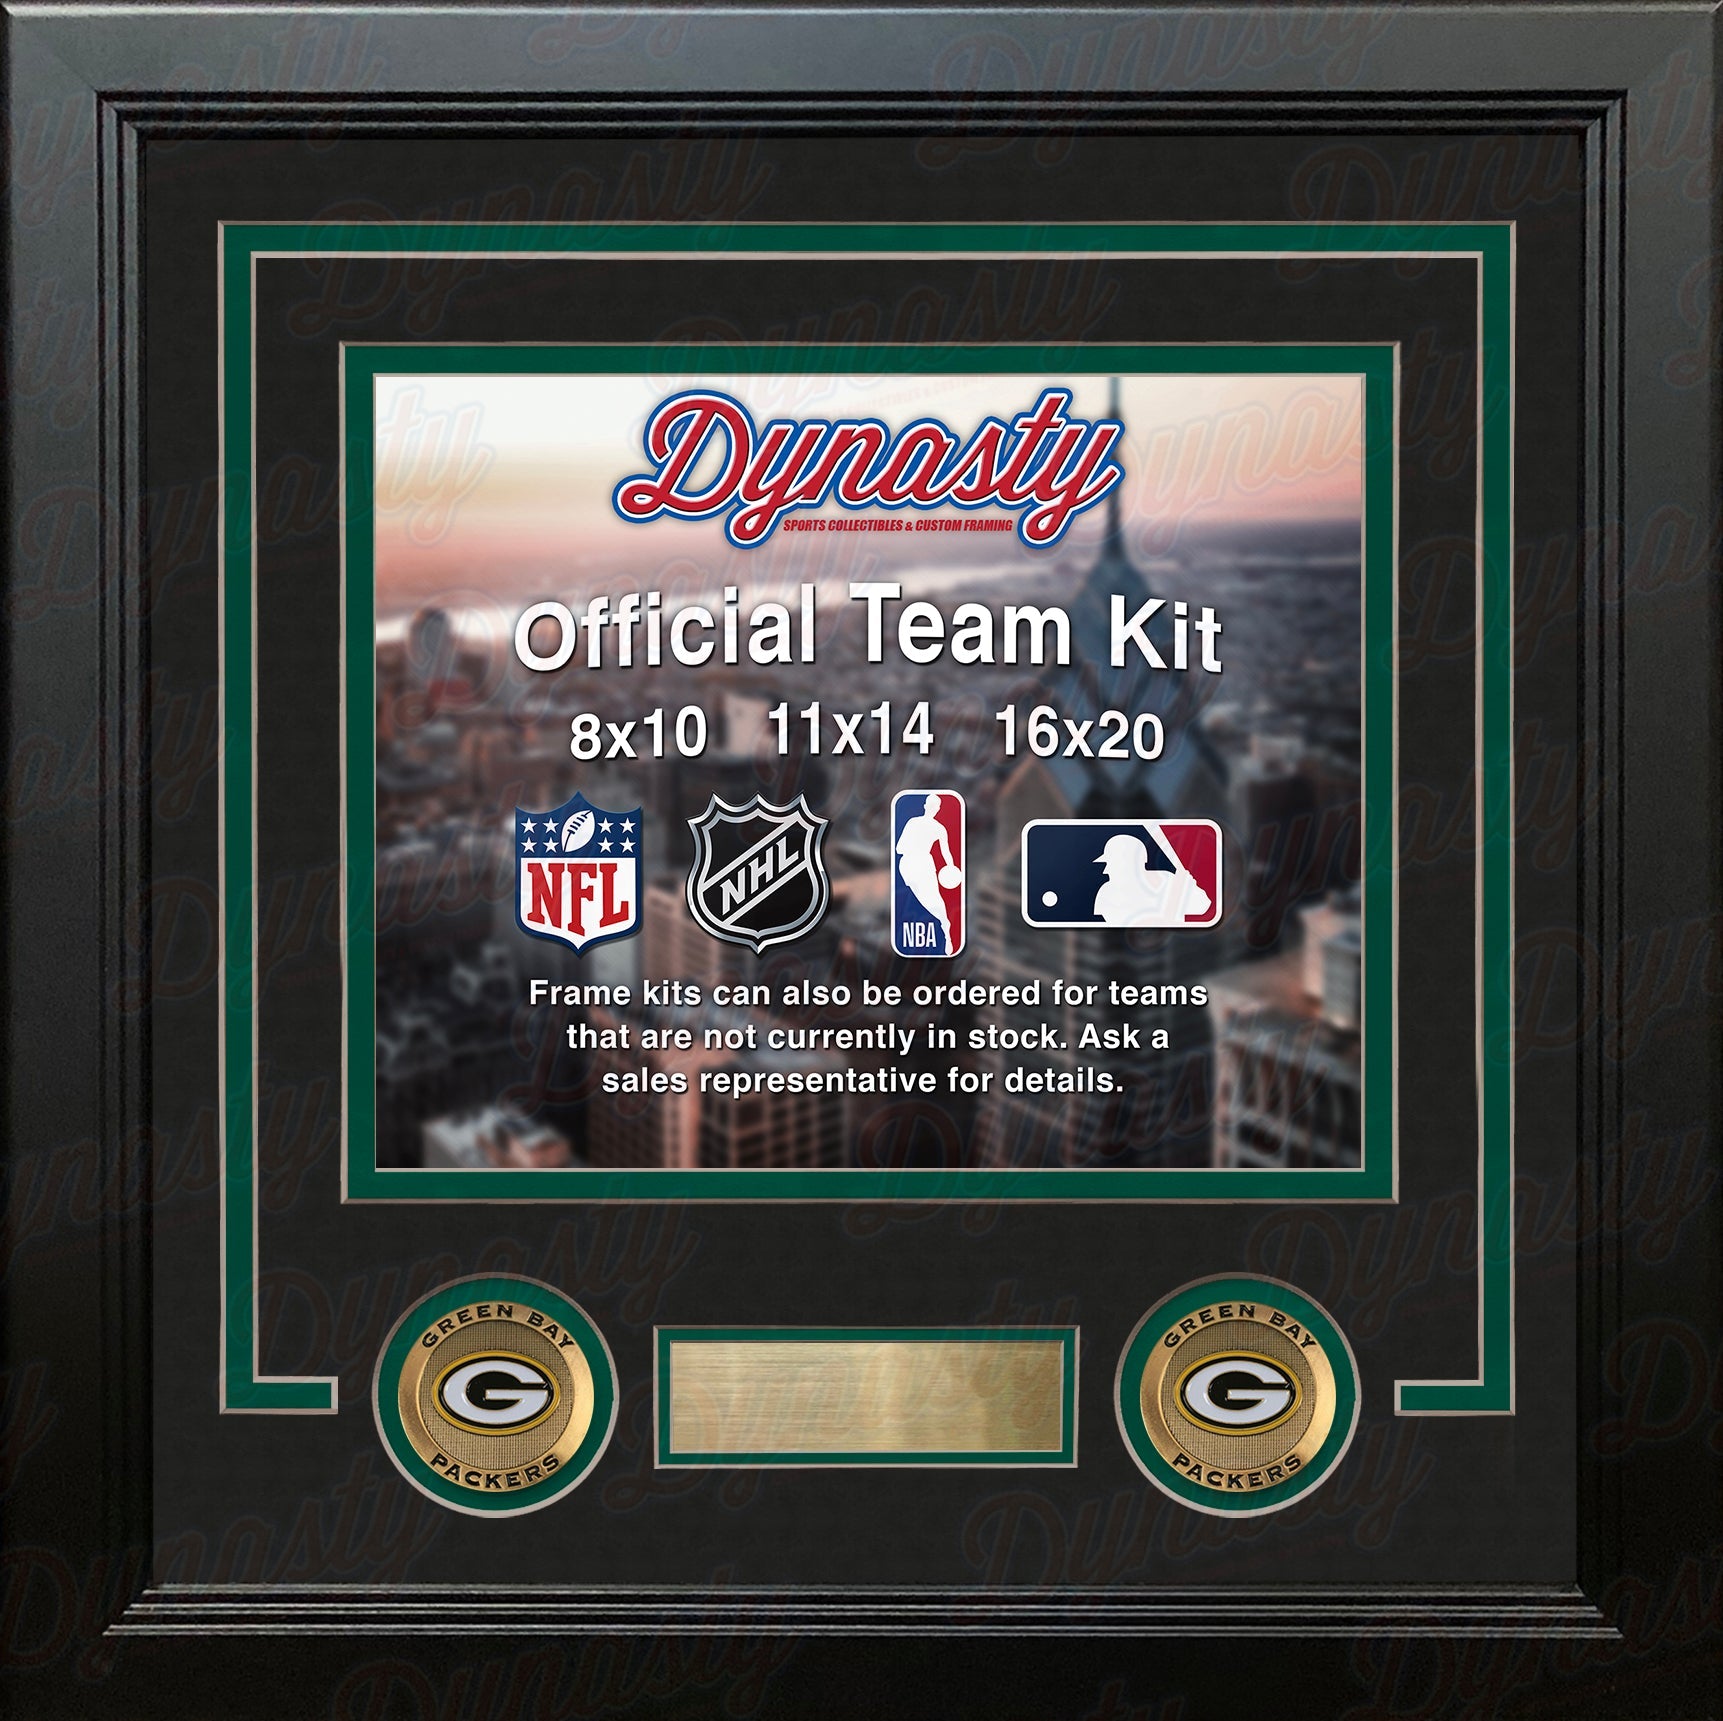 Green Bay Packers Custom NFL Football 11x14 Picture Frame Kit (Multiple Colors) - Dynasty Sports & Framing 